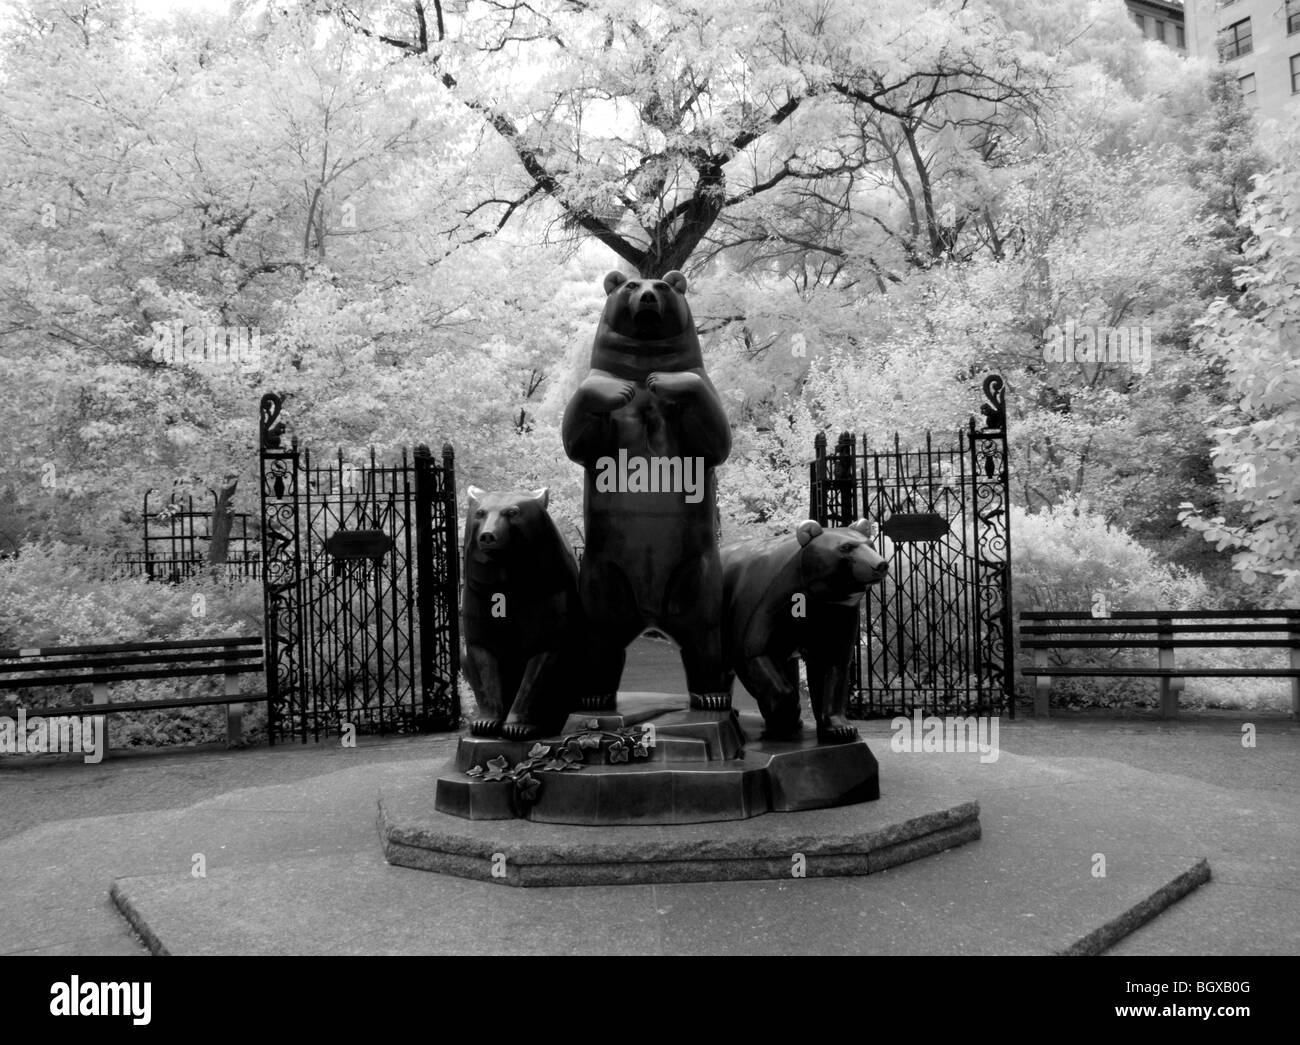 Infrared black and white of sculpture in Central Park New York City Stock Photo